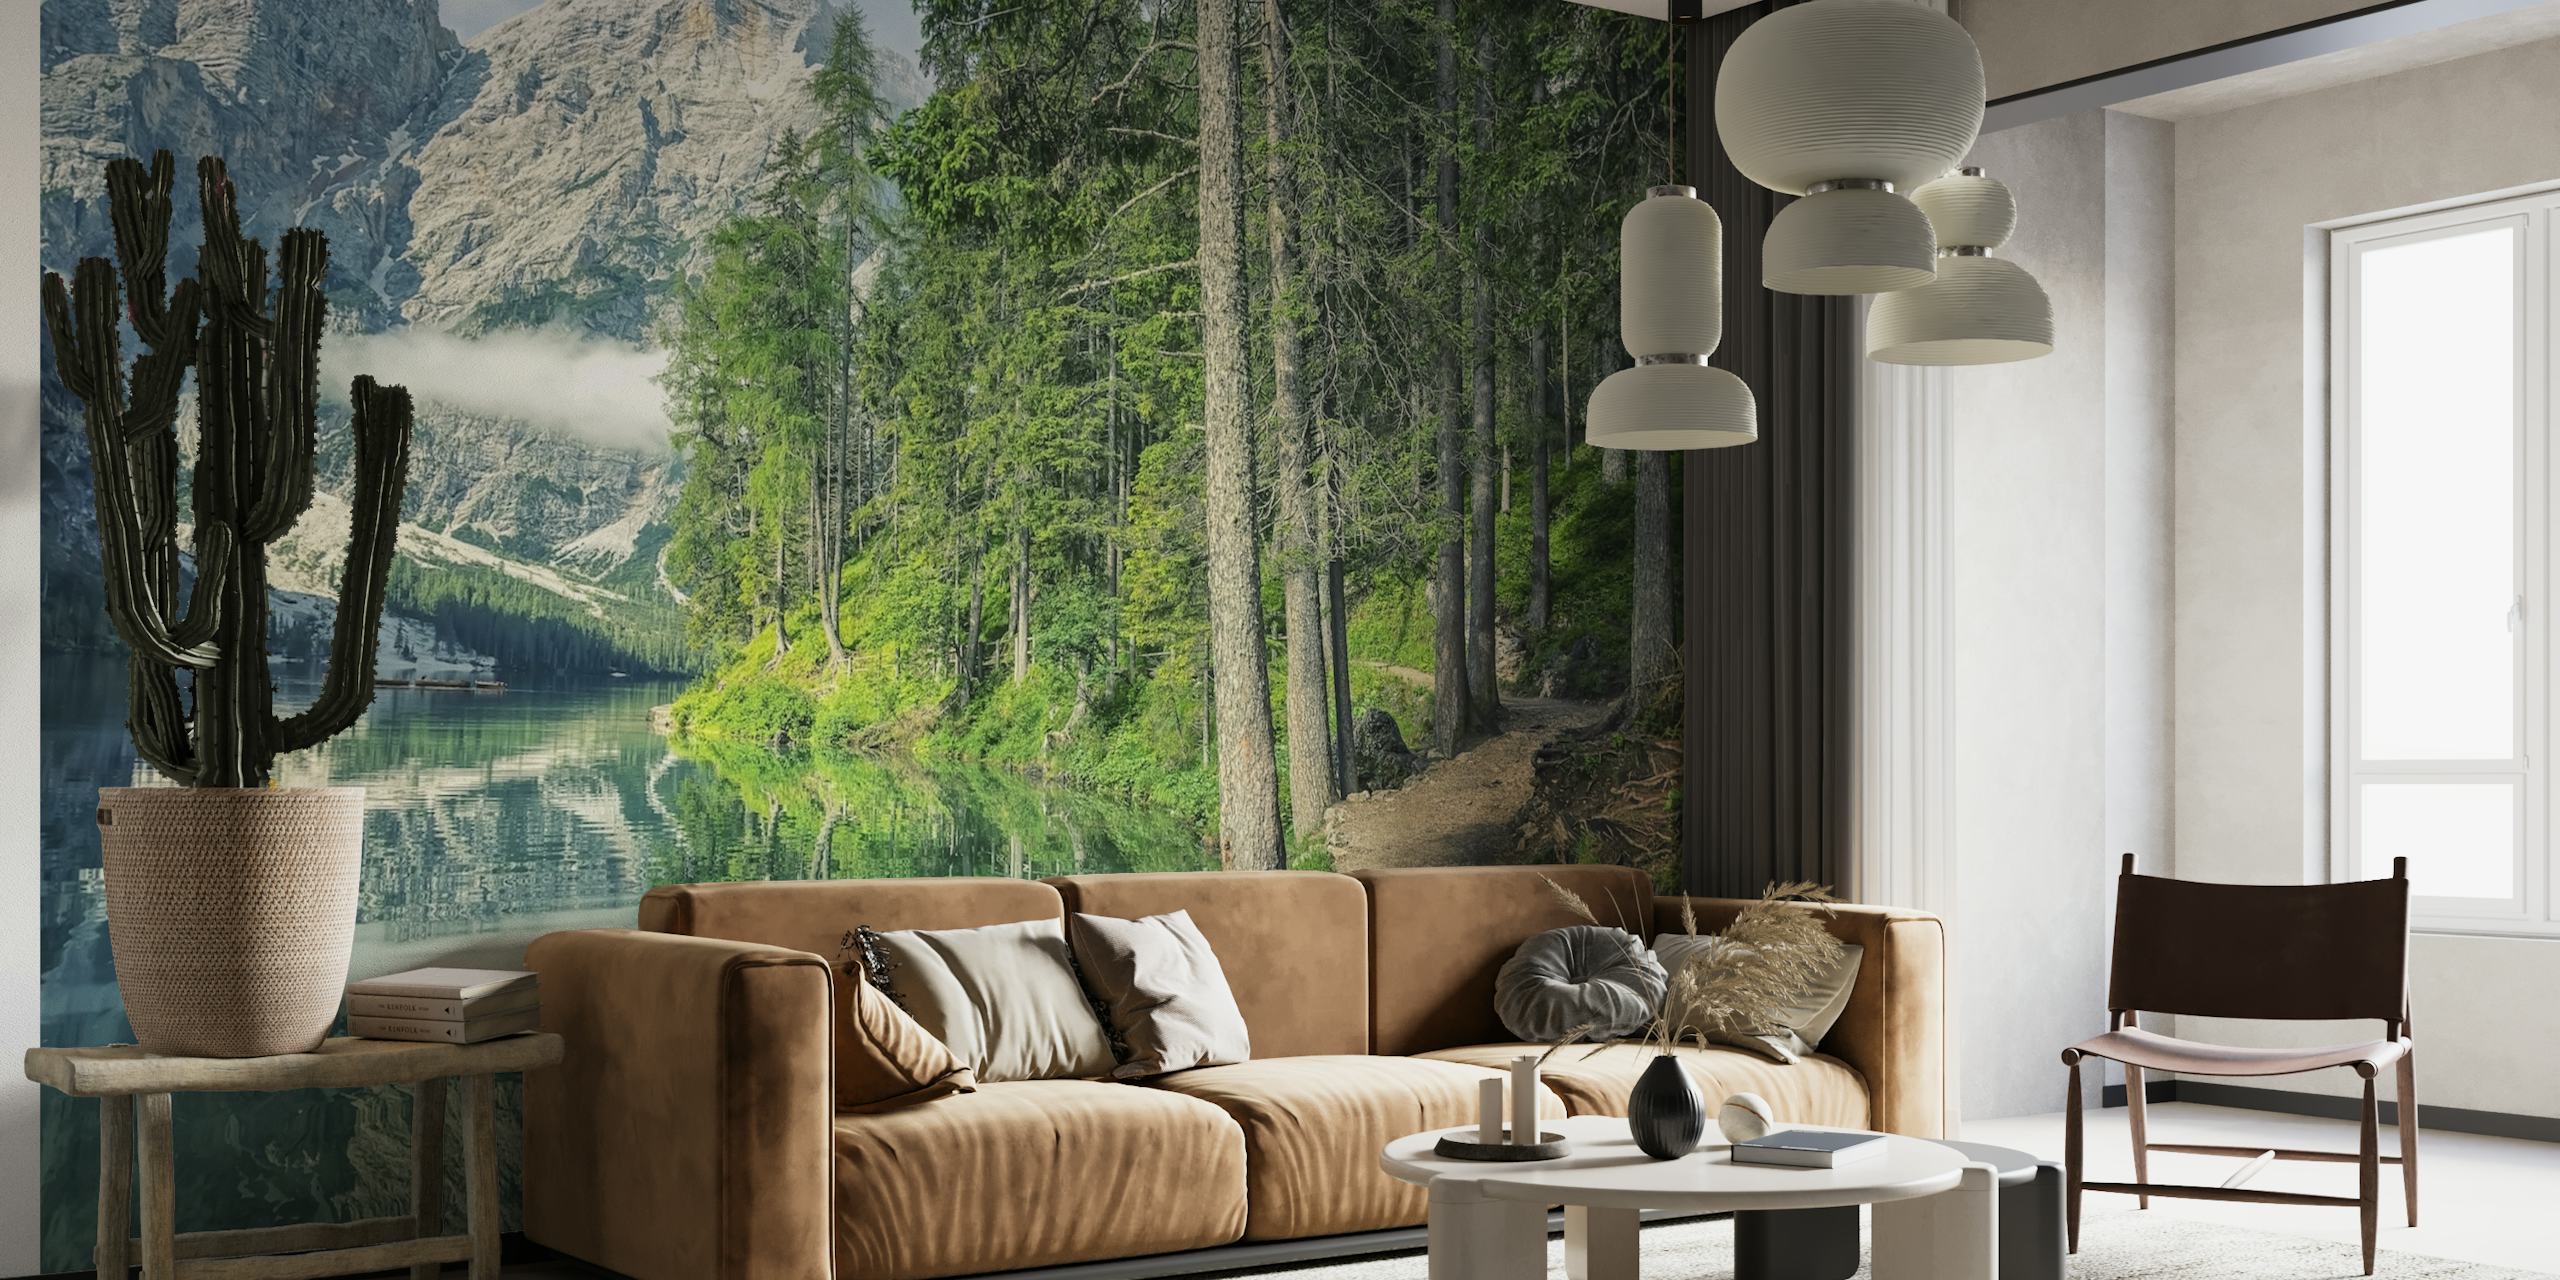 Tranquil lake scenery with a forest path leading towards mountains wall mural.